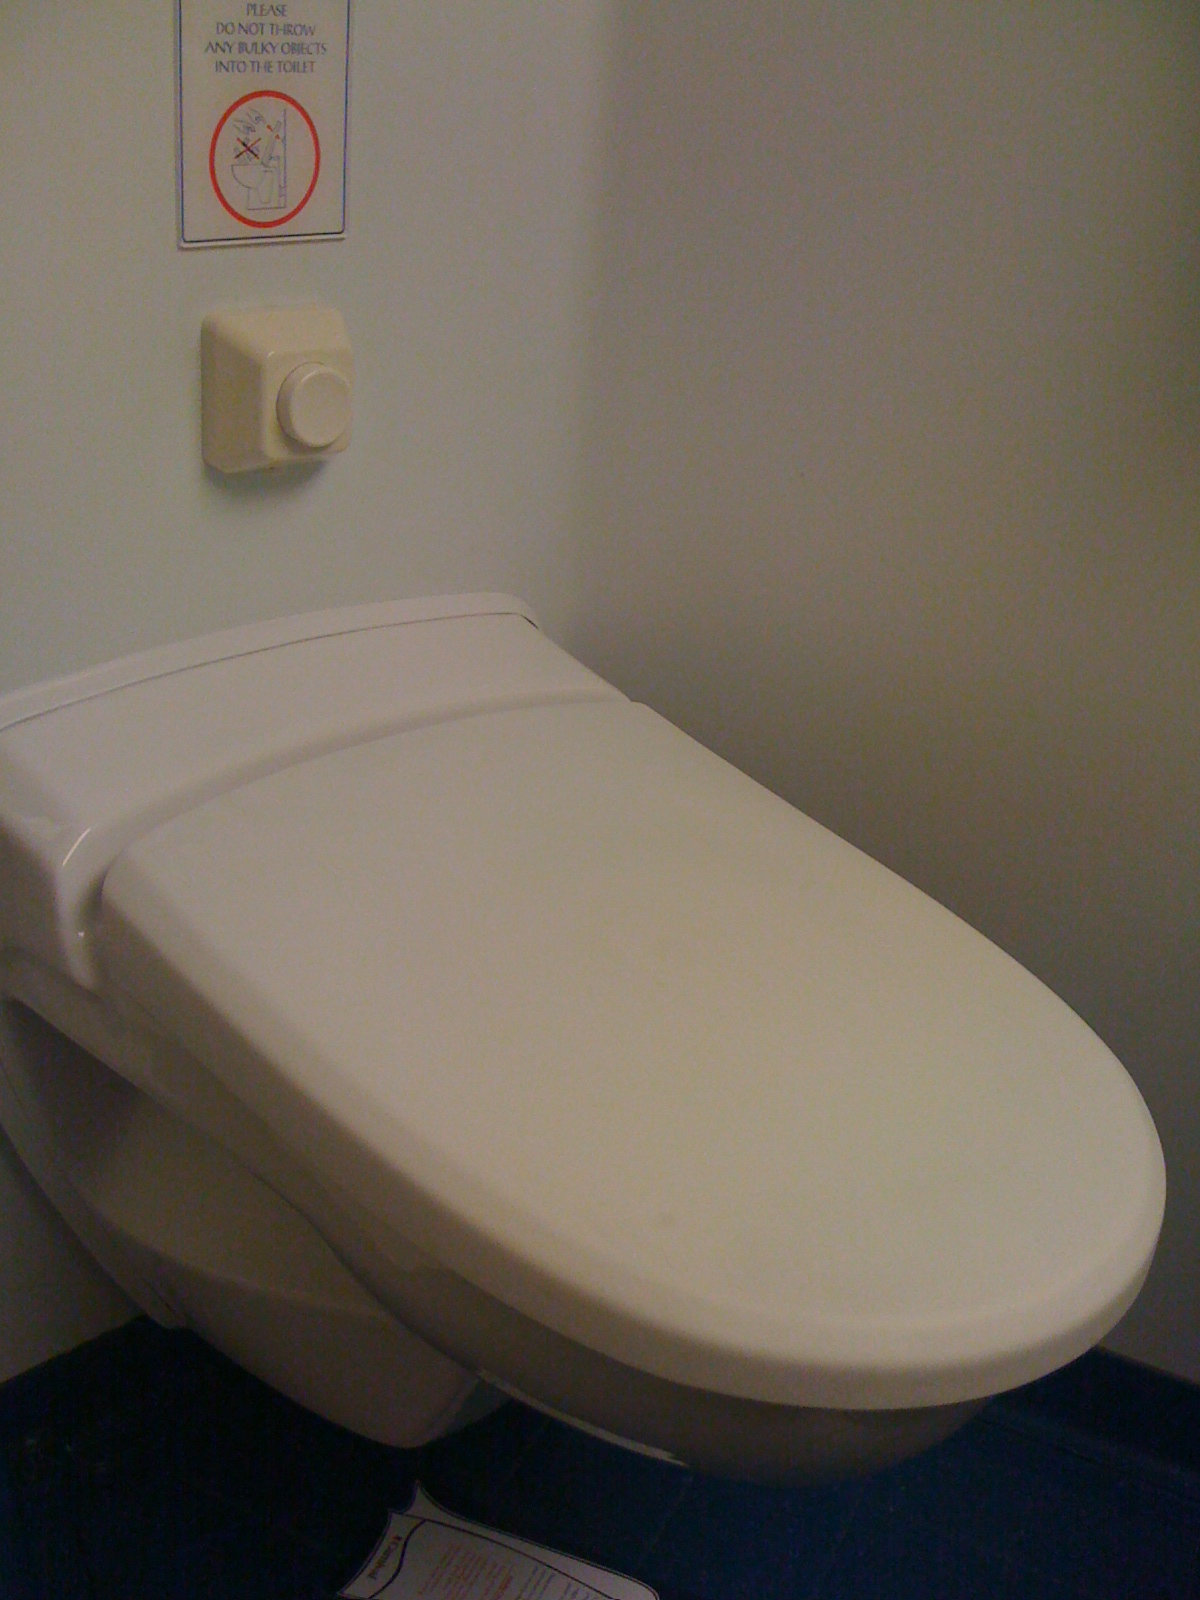 Toilet Seat Down Or Up